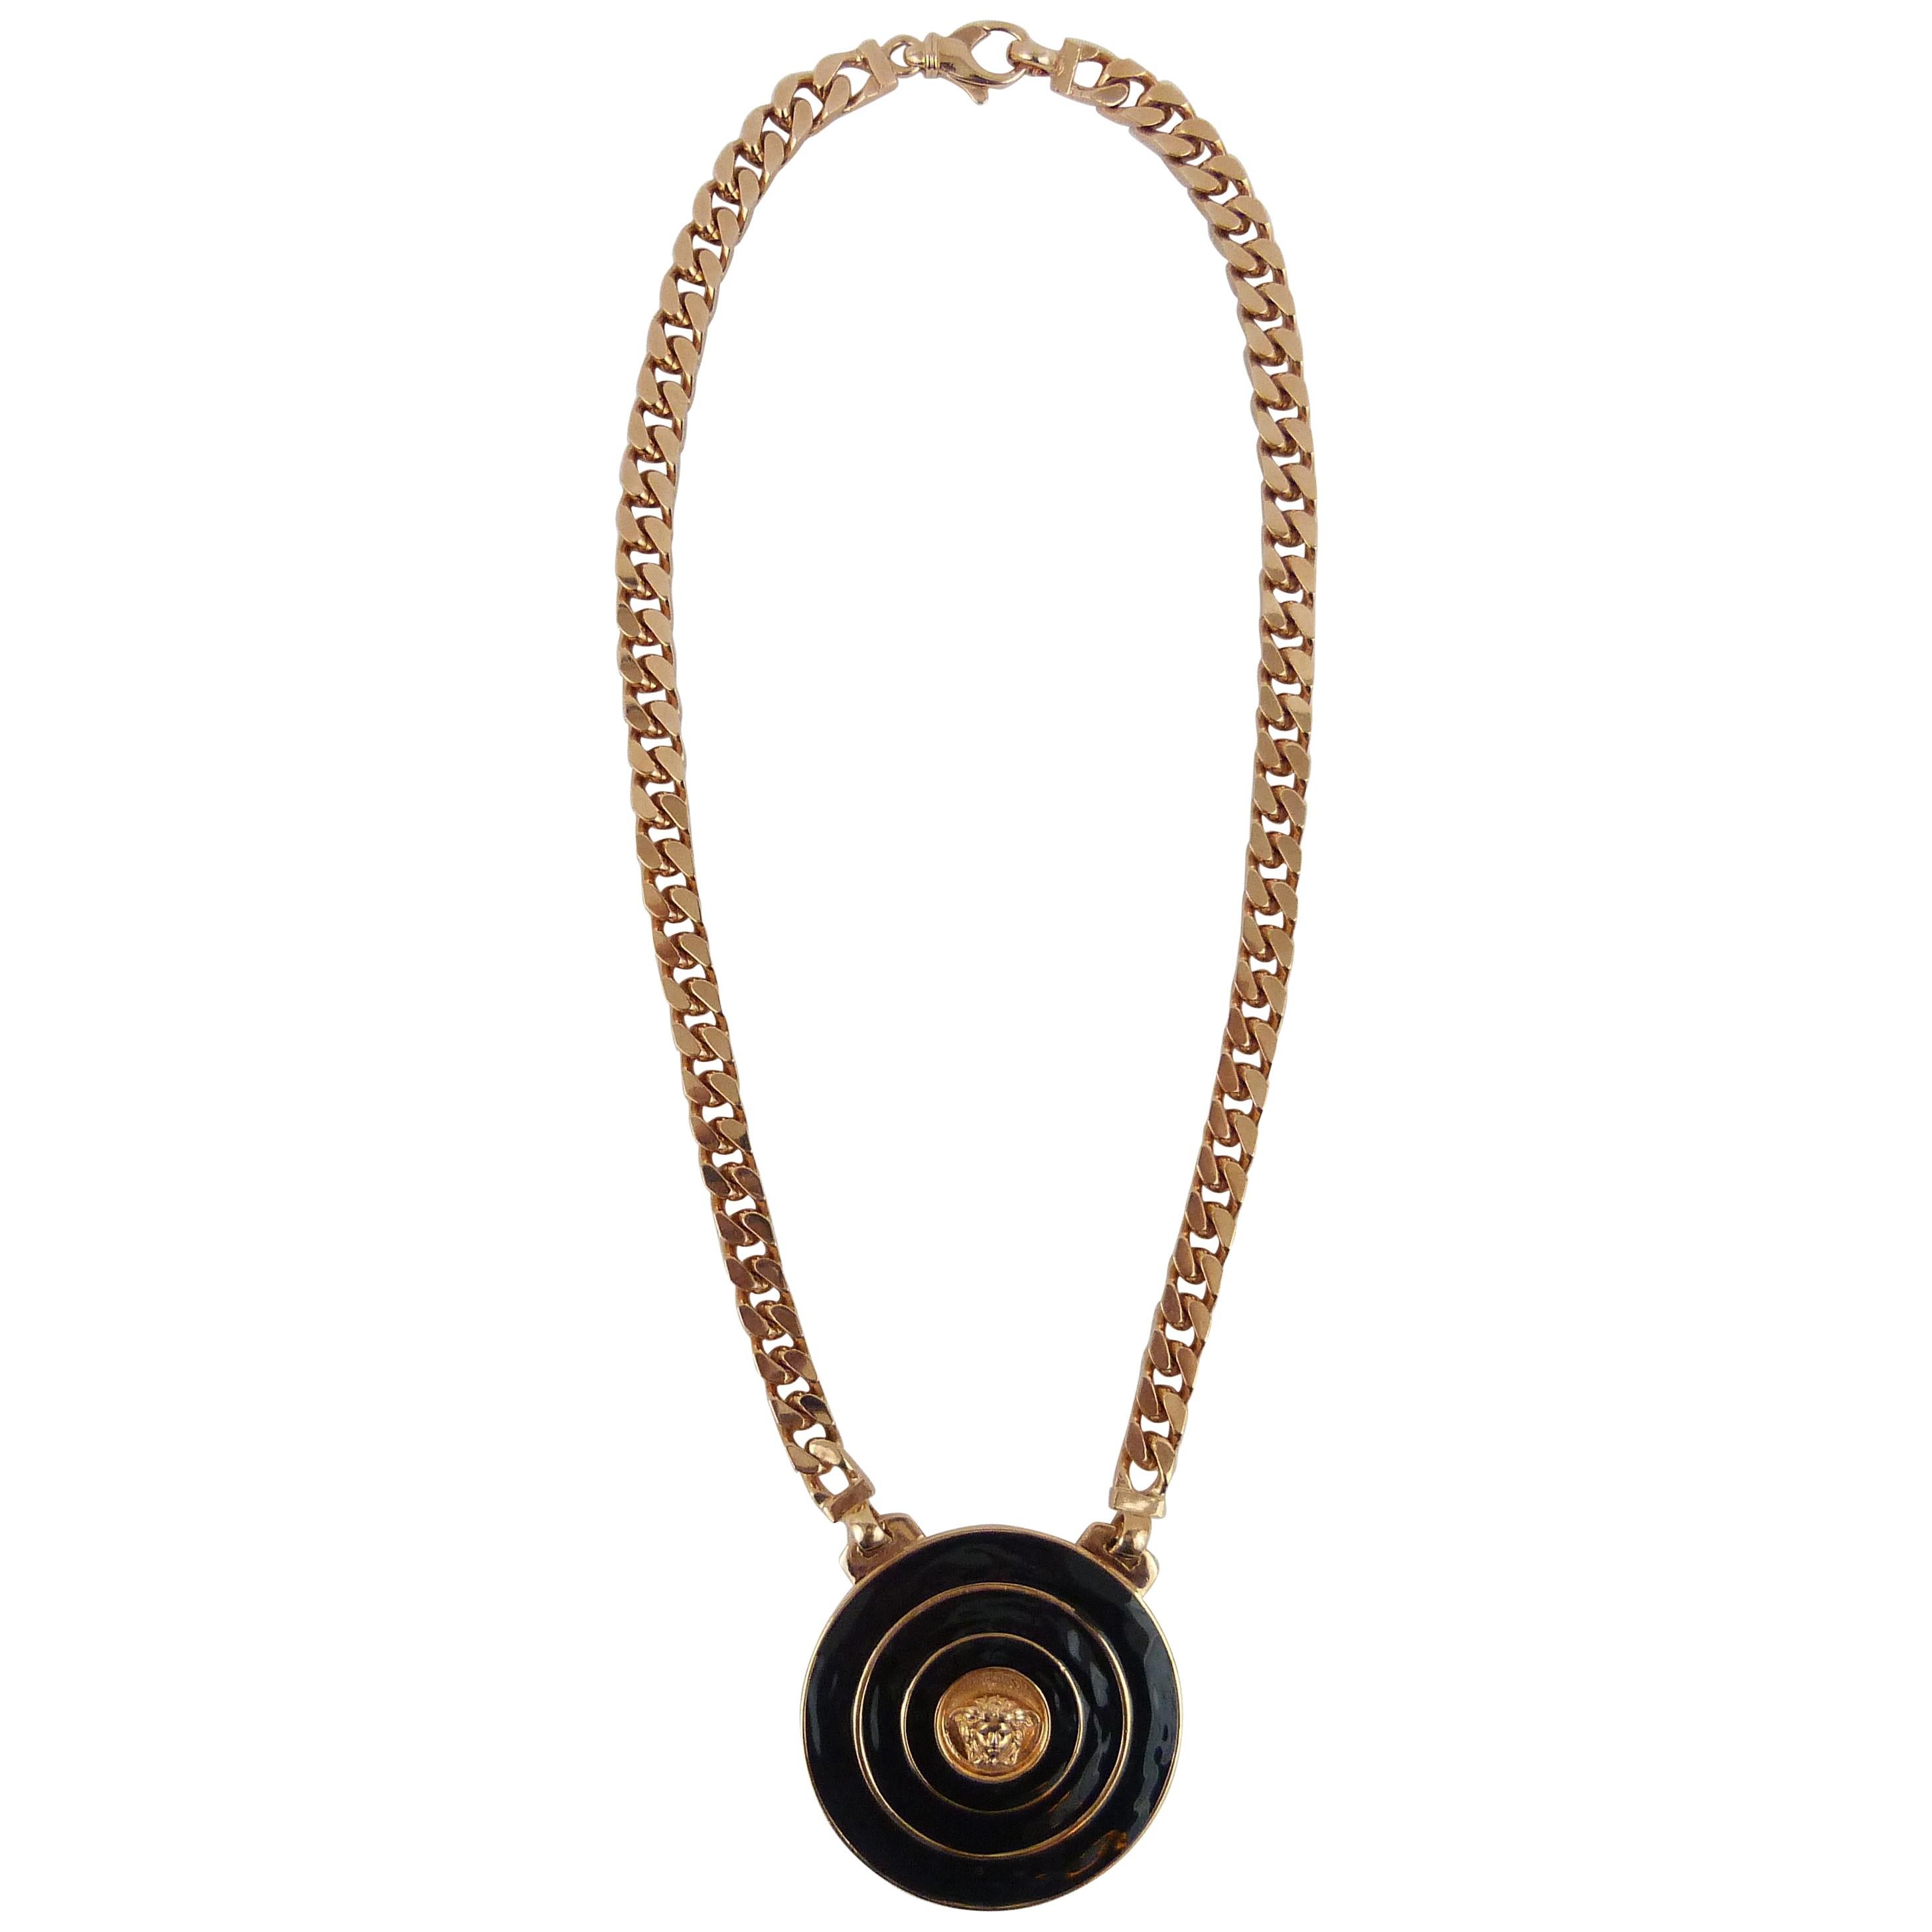 Gianni Versace rose gold and black enamel chain medallion necklace  